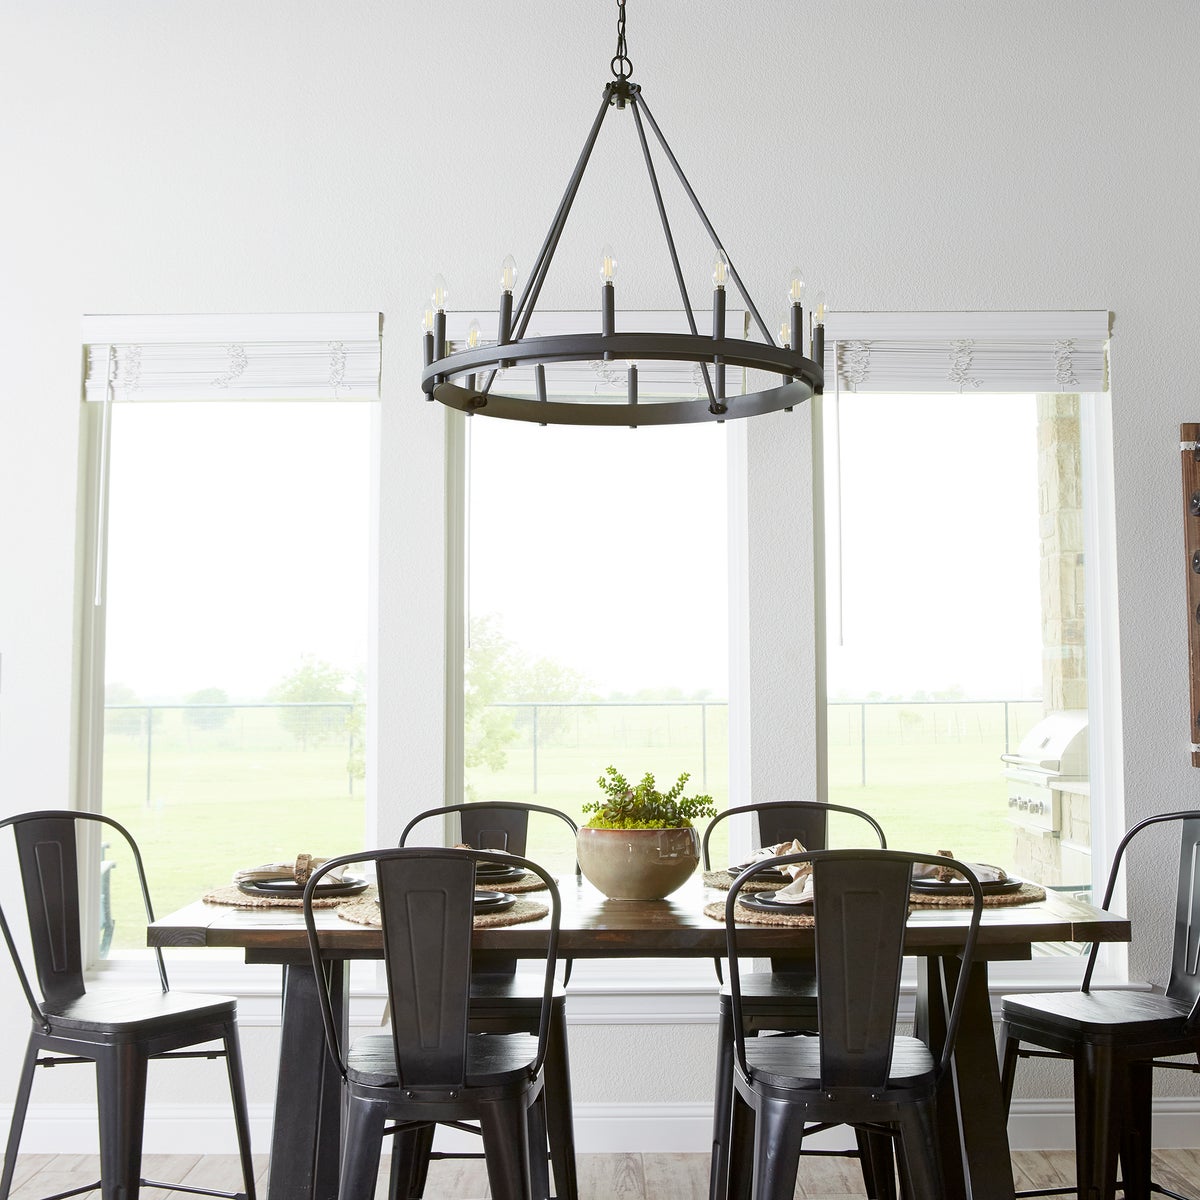 A farmhouse-inspired dining table with chairs and a Wagon Wheel Chandelier, creating an industrial aesthetic. Elevate your space with this customizable fixture featuring a beautiful finish and candle sleeves in aged brass, noir, and satin nickel options. Perfect as a prominent display or supplementary accent.